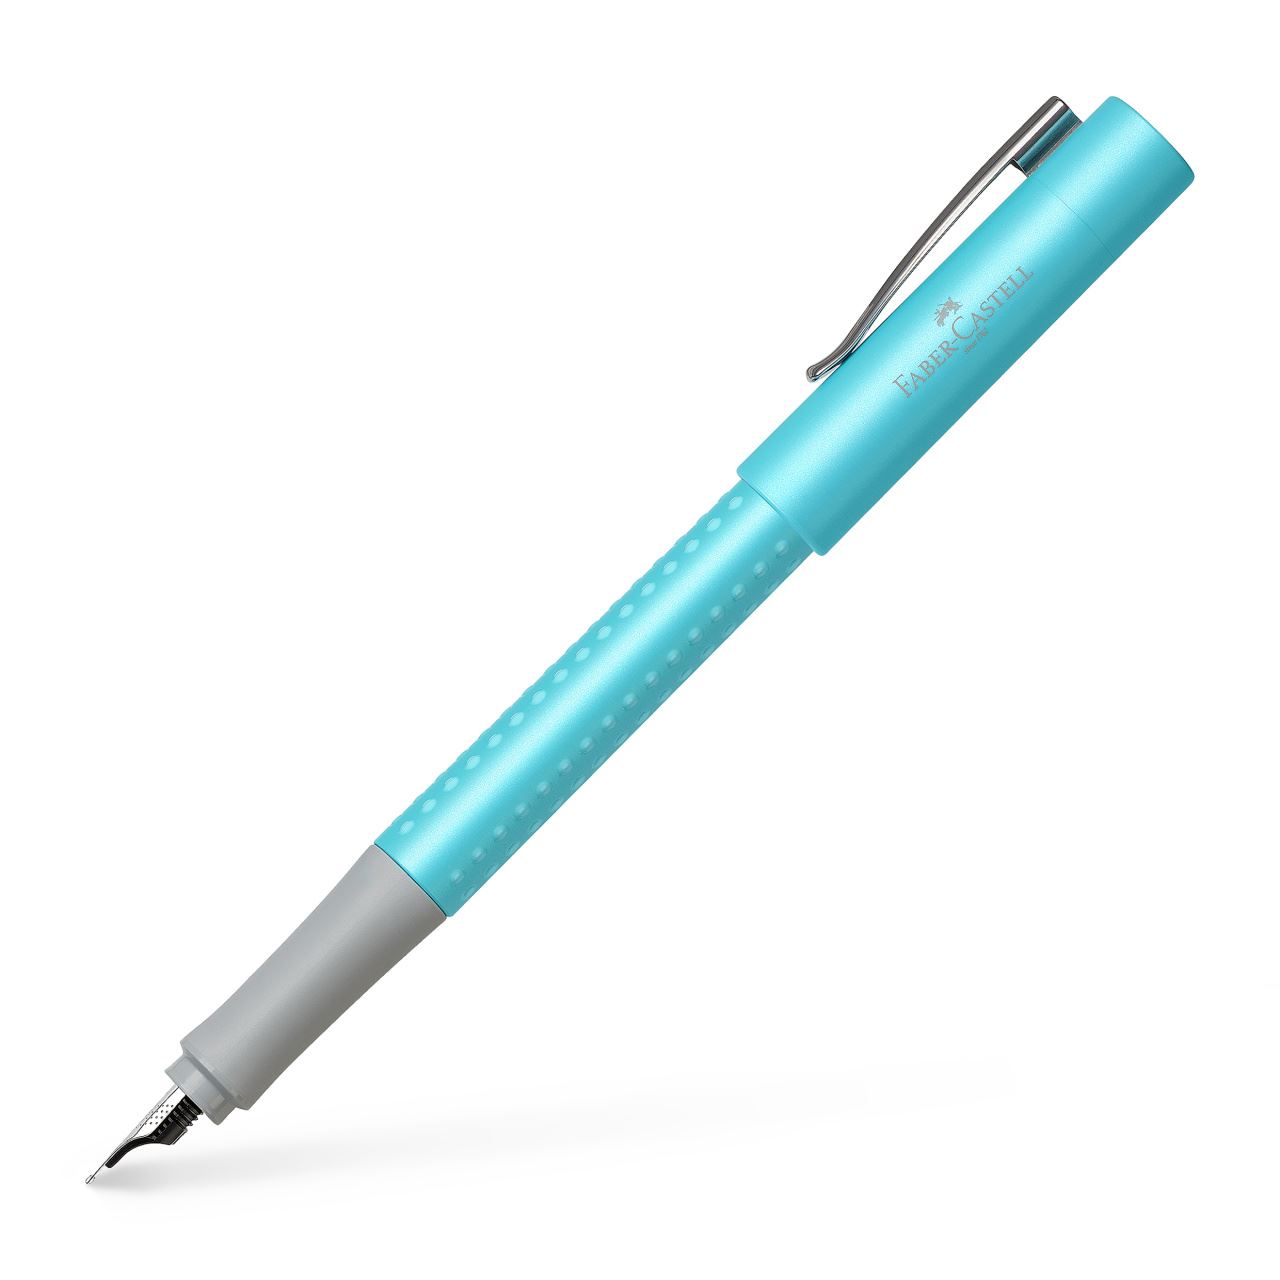 Faber-Castell - Fountain pen Grip Pearl Edition M turquoise